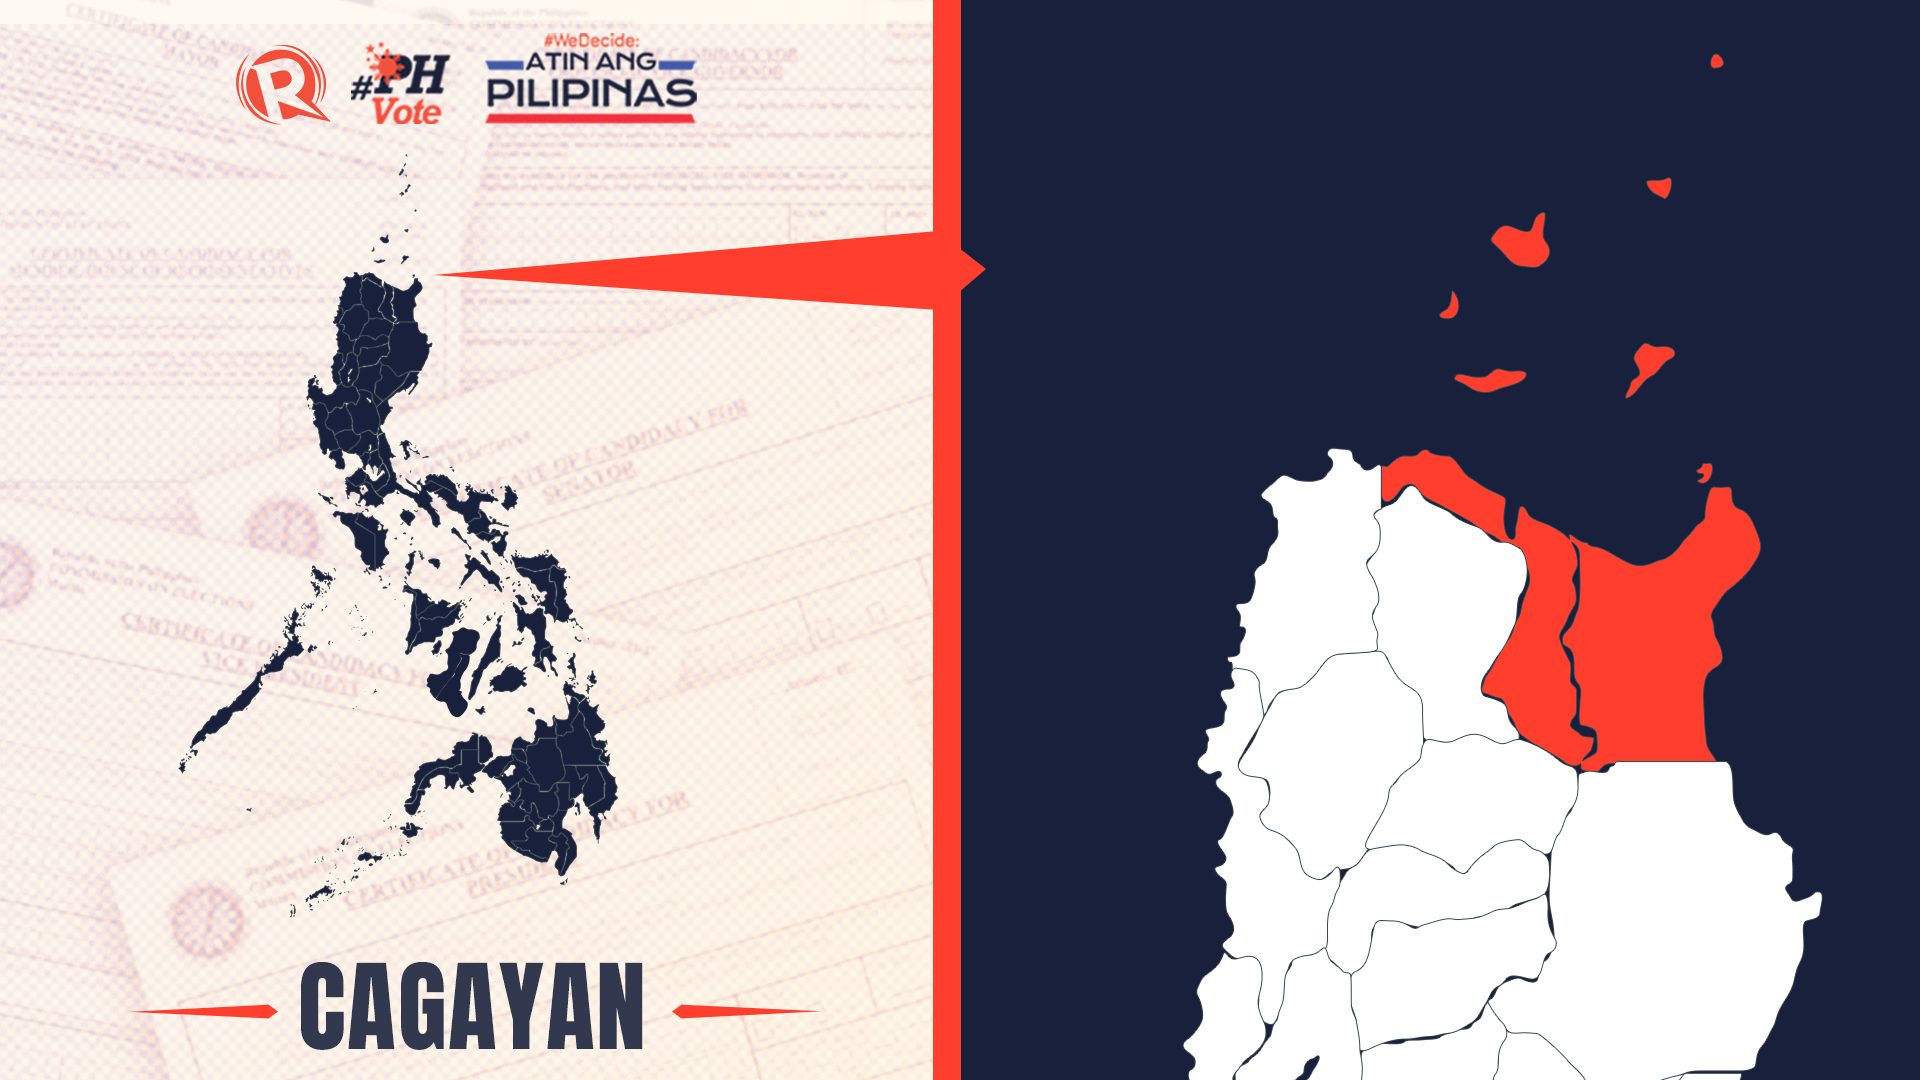 LIST: Who is running in Cagayan in the 2022 Philippine elections?